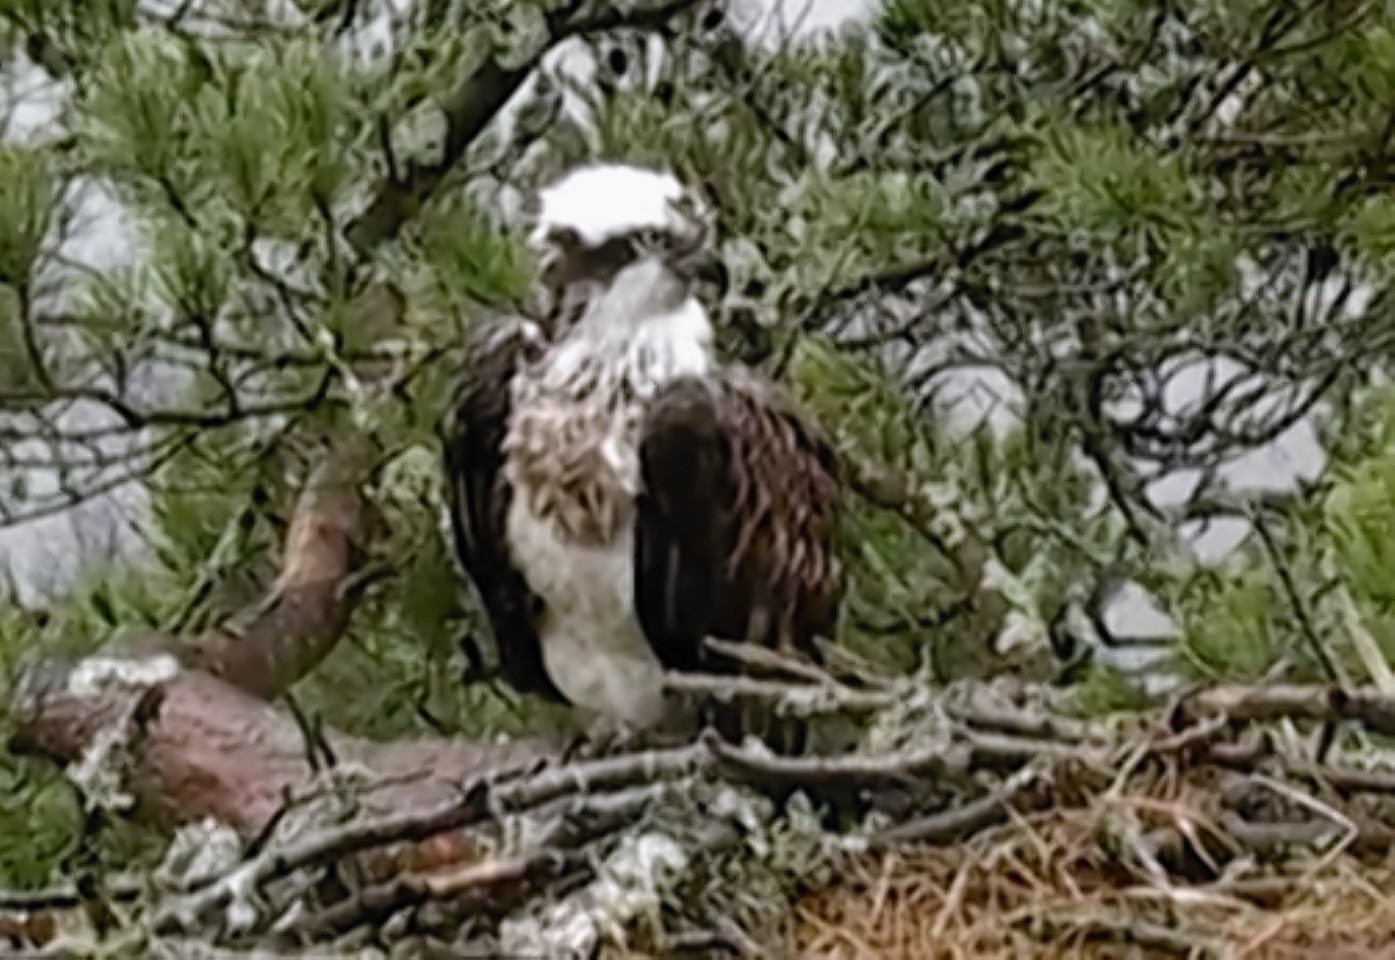 The new osprey at the Loch of the Lowes nest